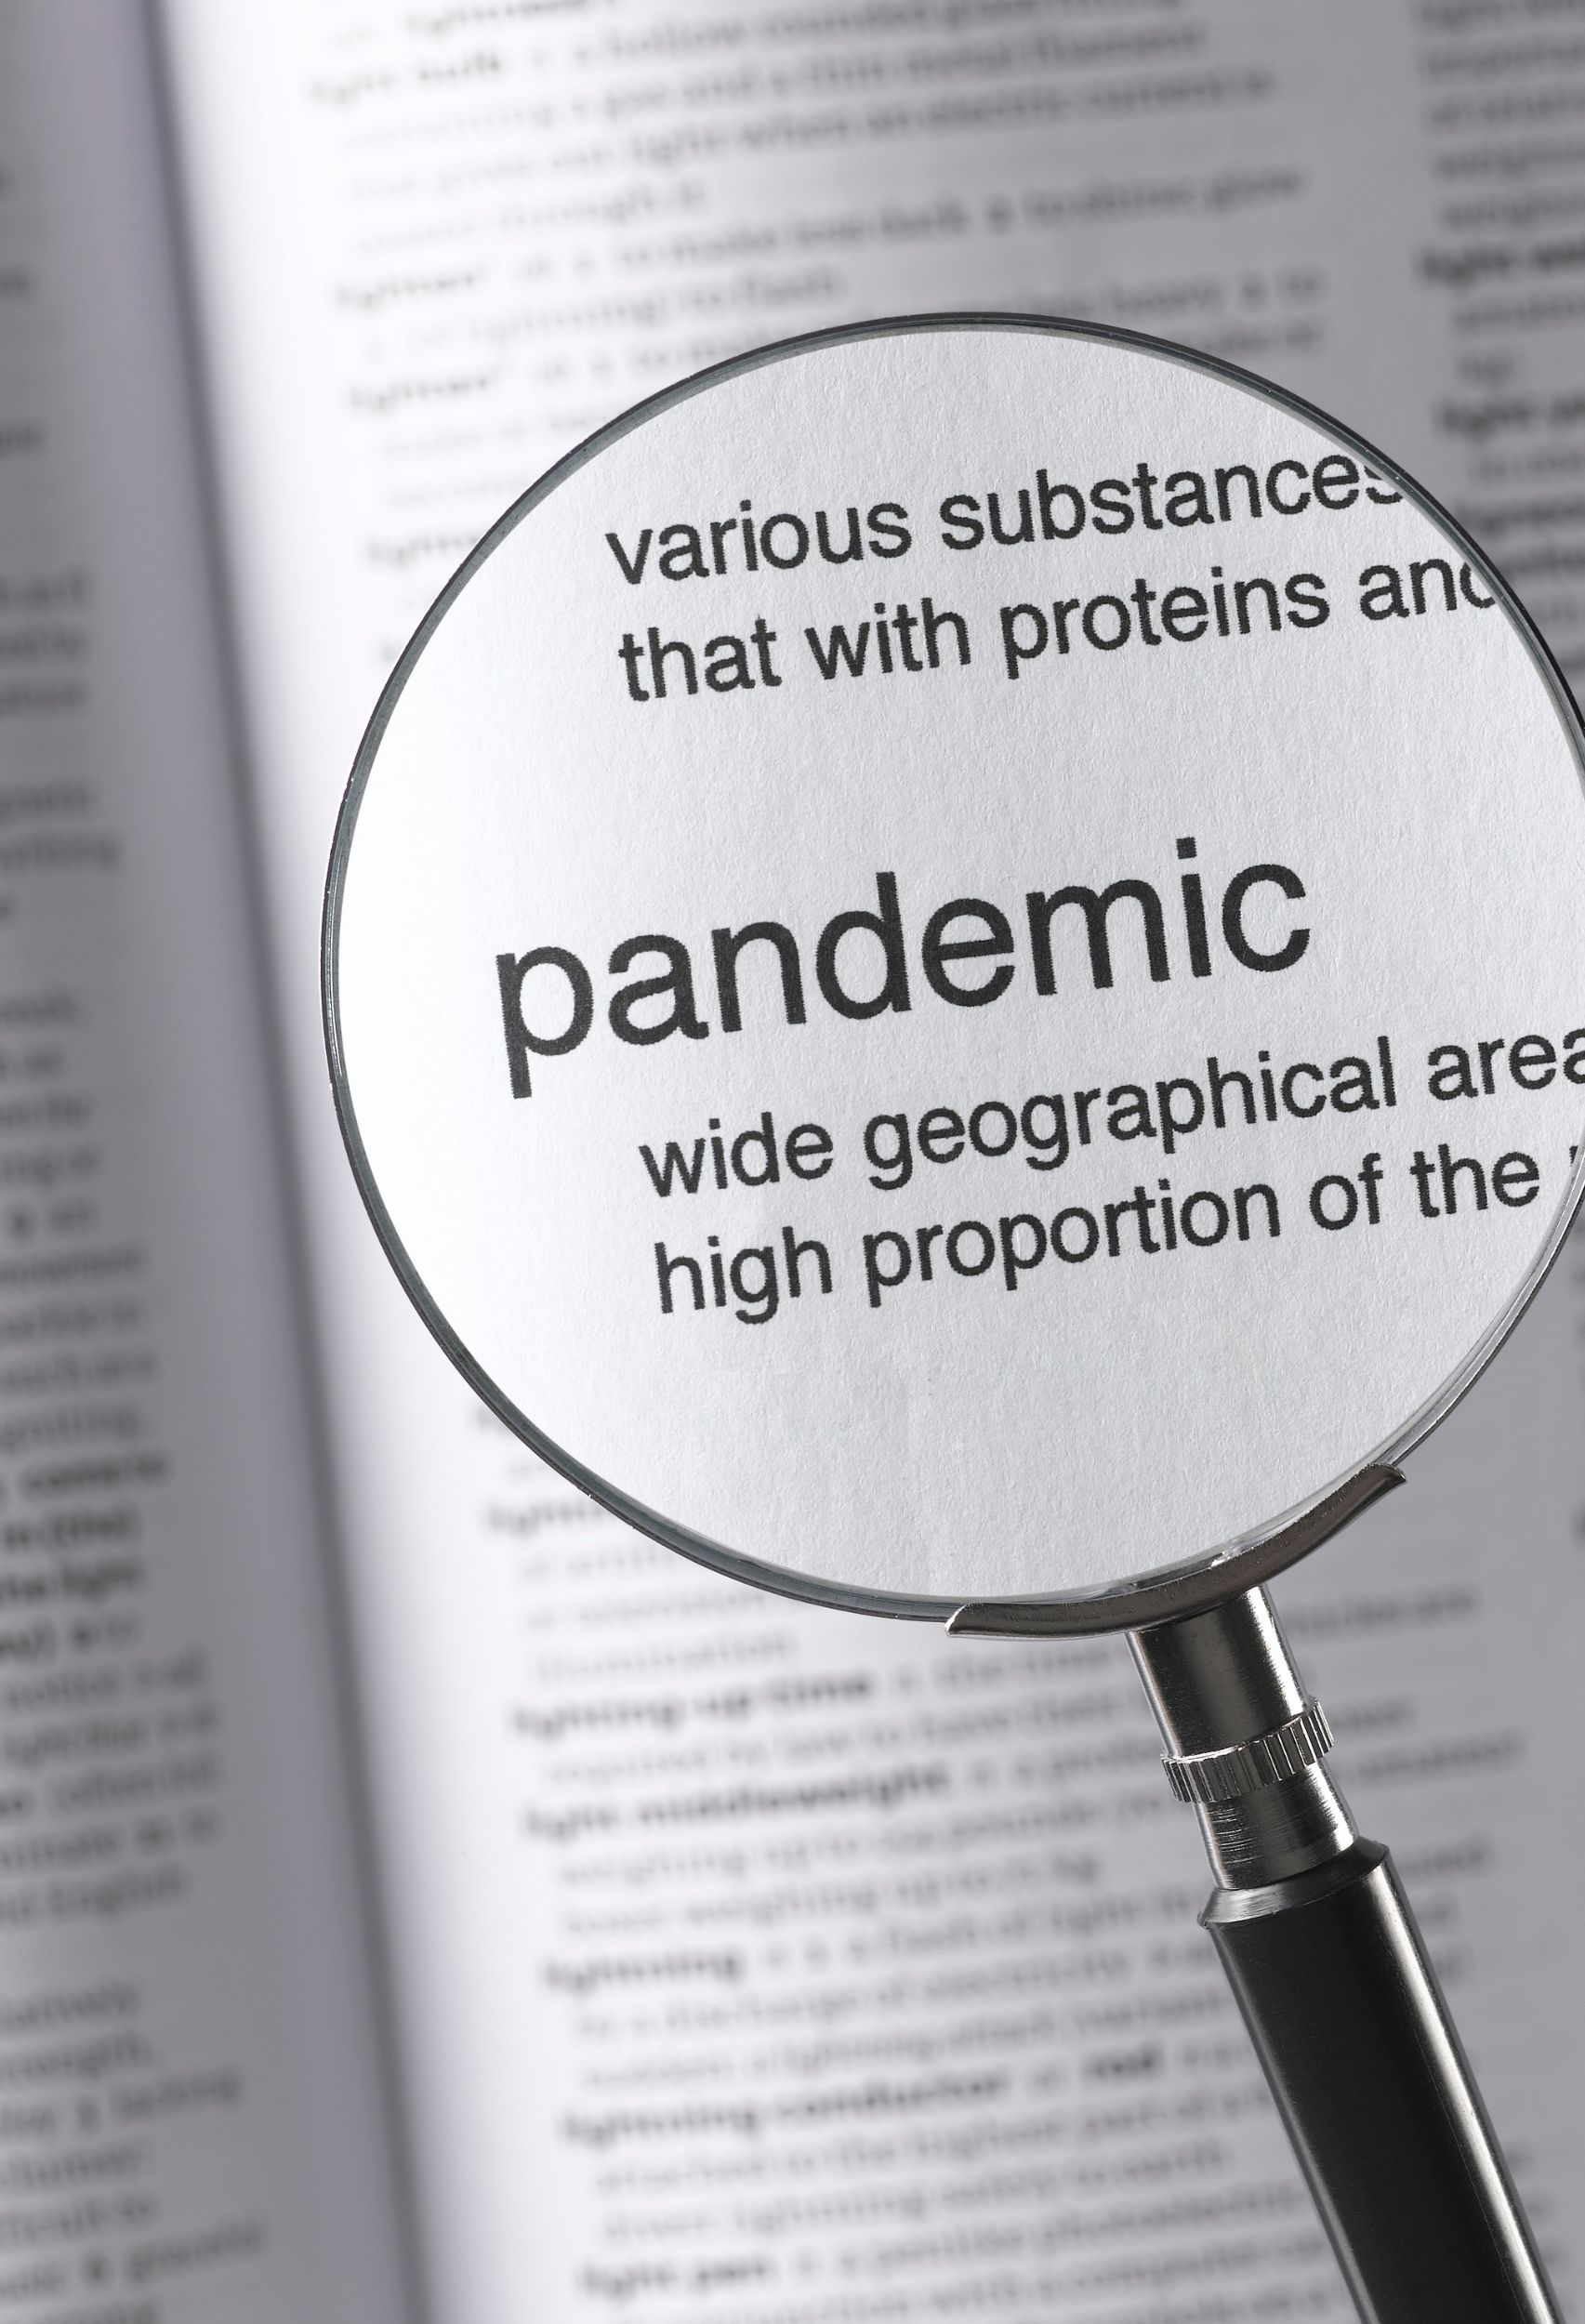 Safety Tips to Observe During the Pandemic - Rita Reviews